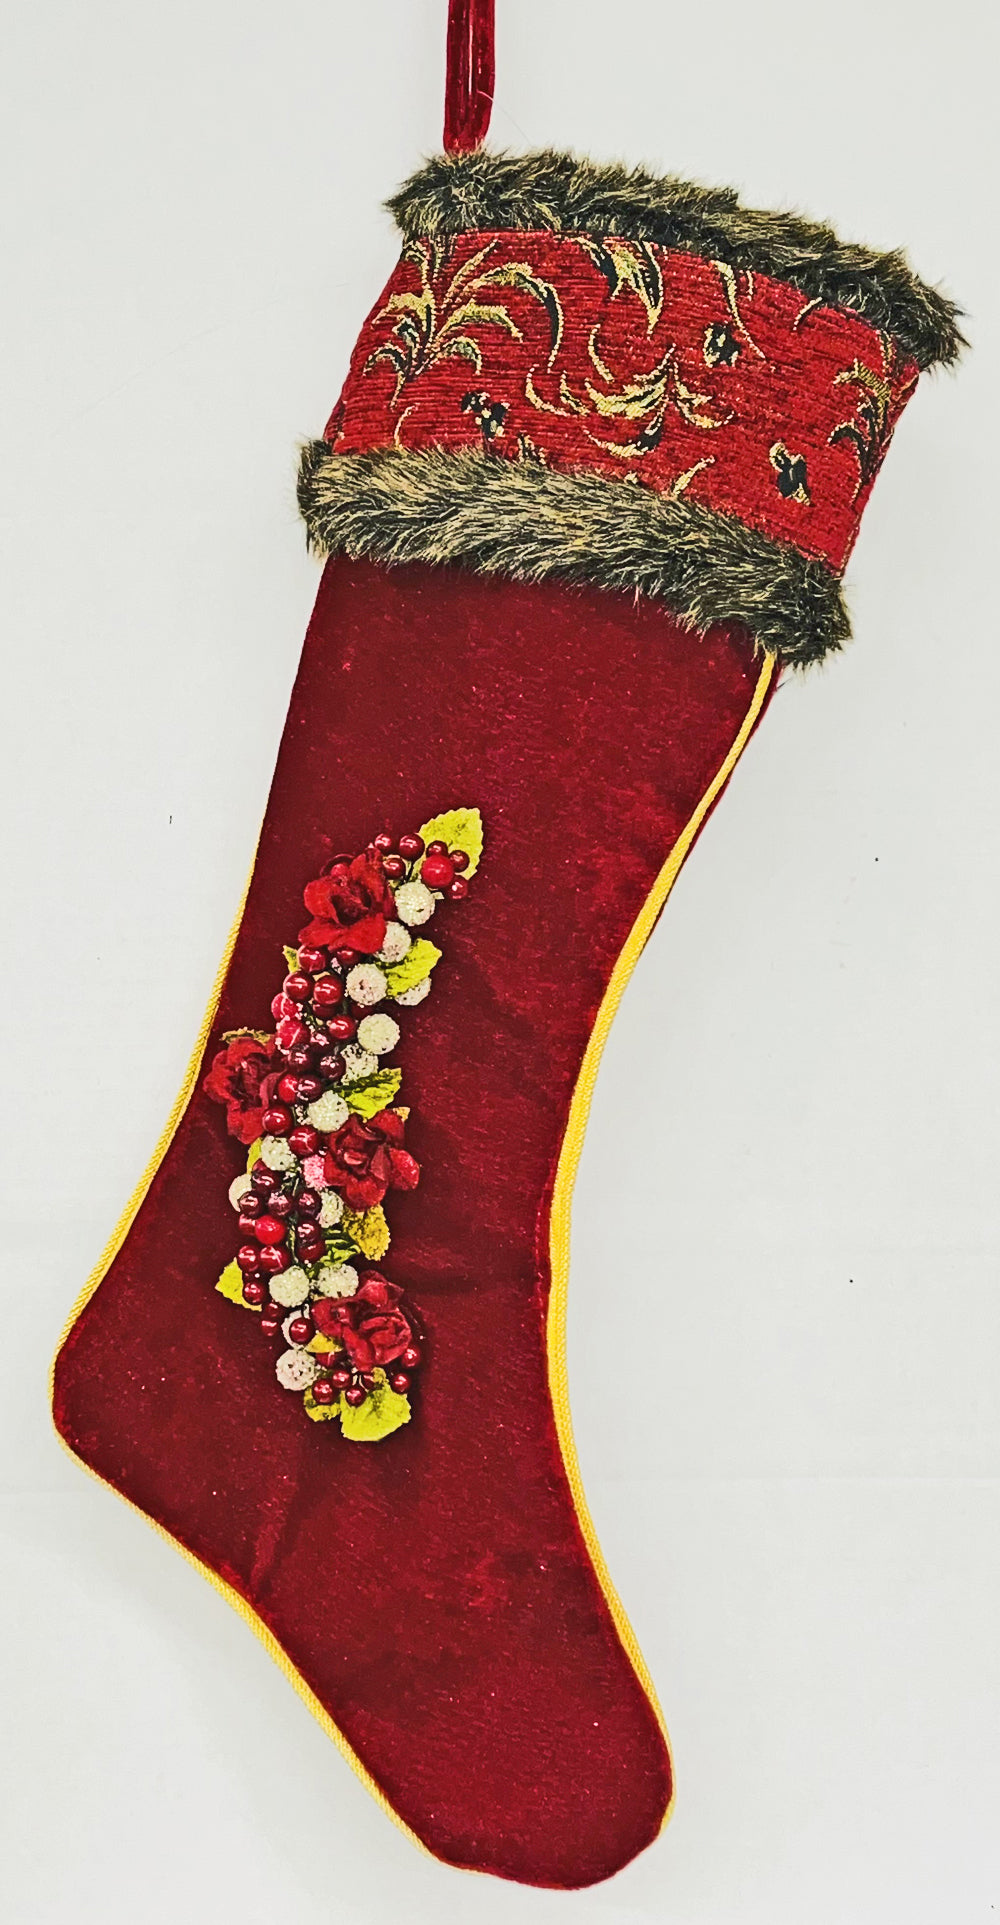 Embroidered Burgundy Christmas Stocking With Faux Fur & Berry Trim